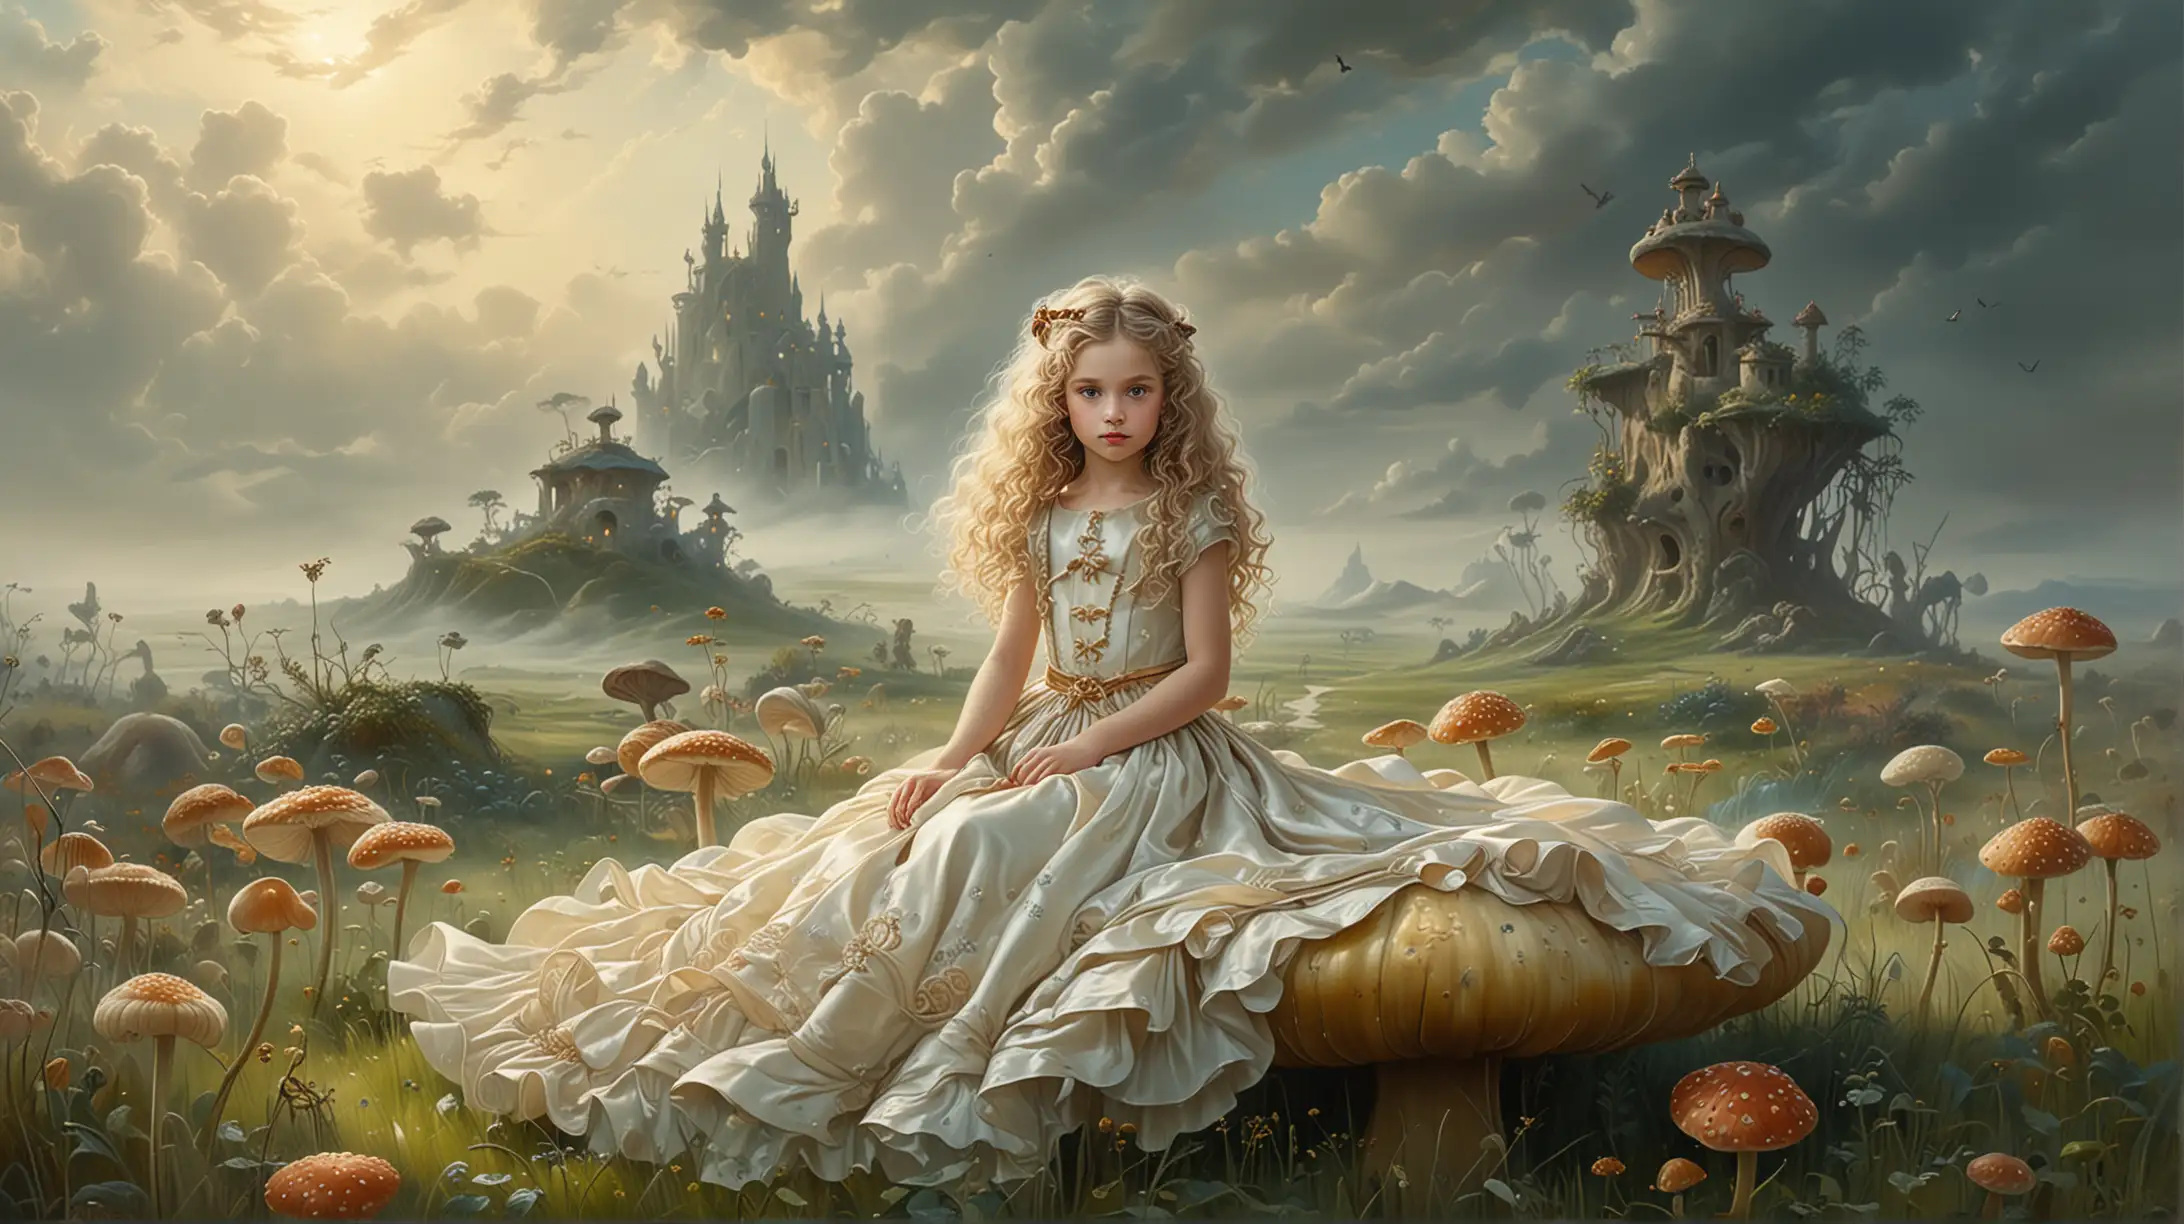 Fantasy Painting Little Girl with Long Curly Hair on Mushroom in Morning Fog